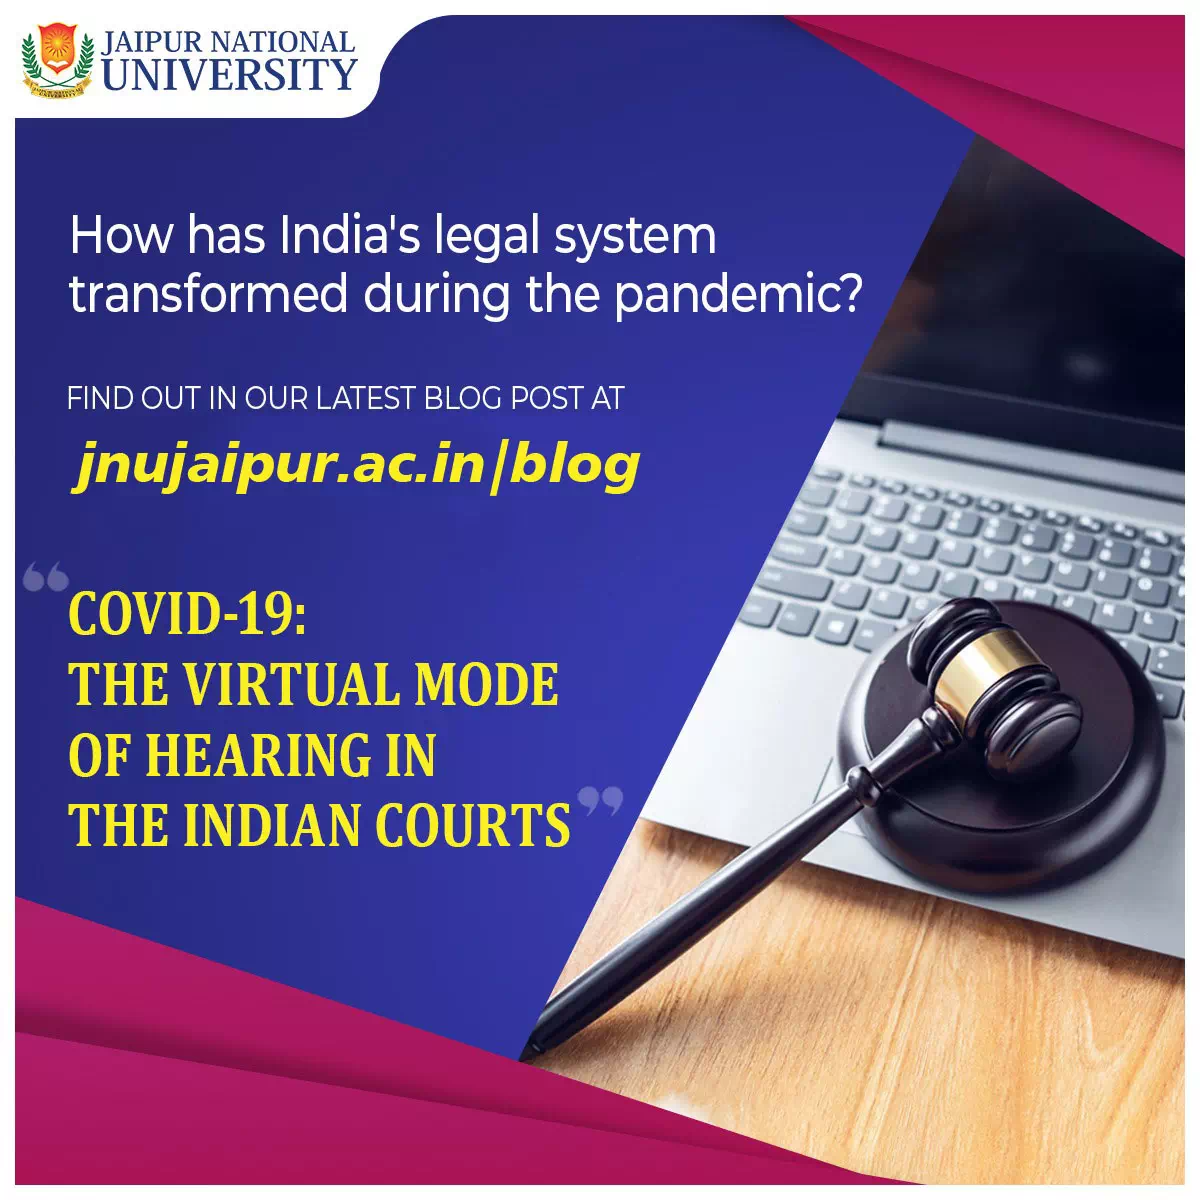 COVID 19-The Virtual Mode of Hearing in the Indian Courts